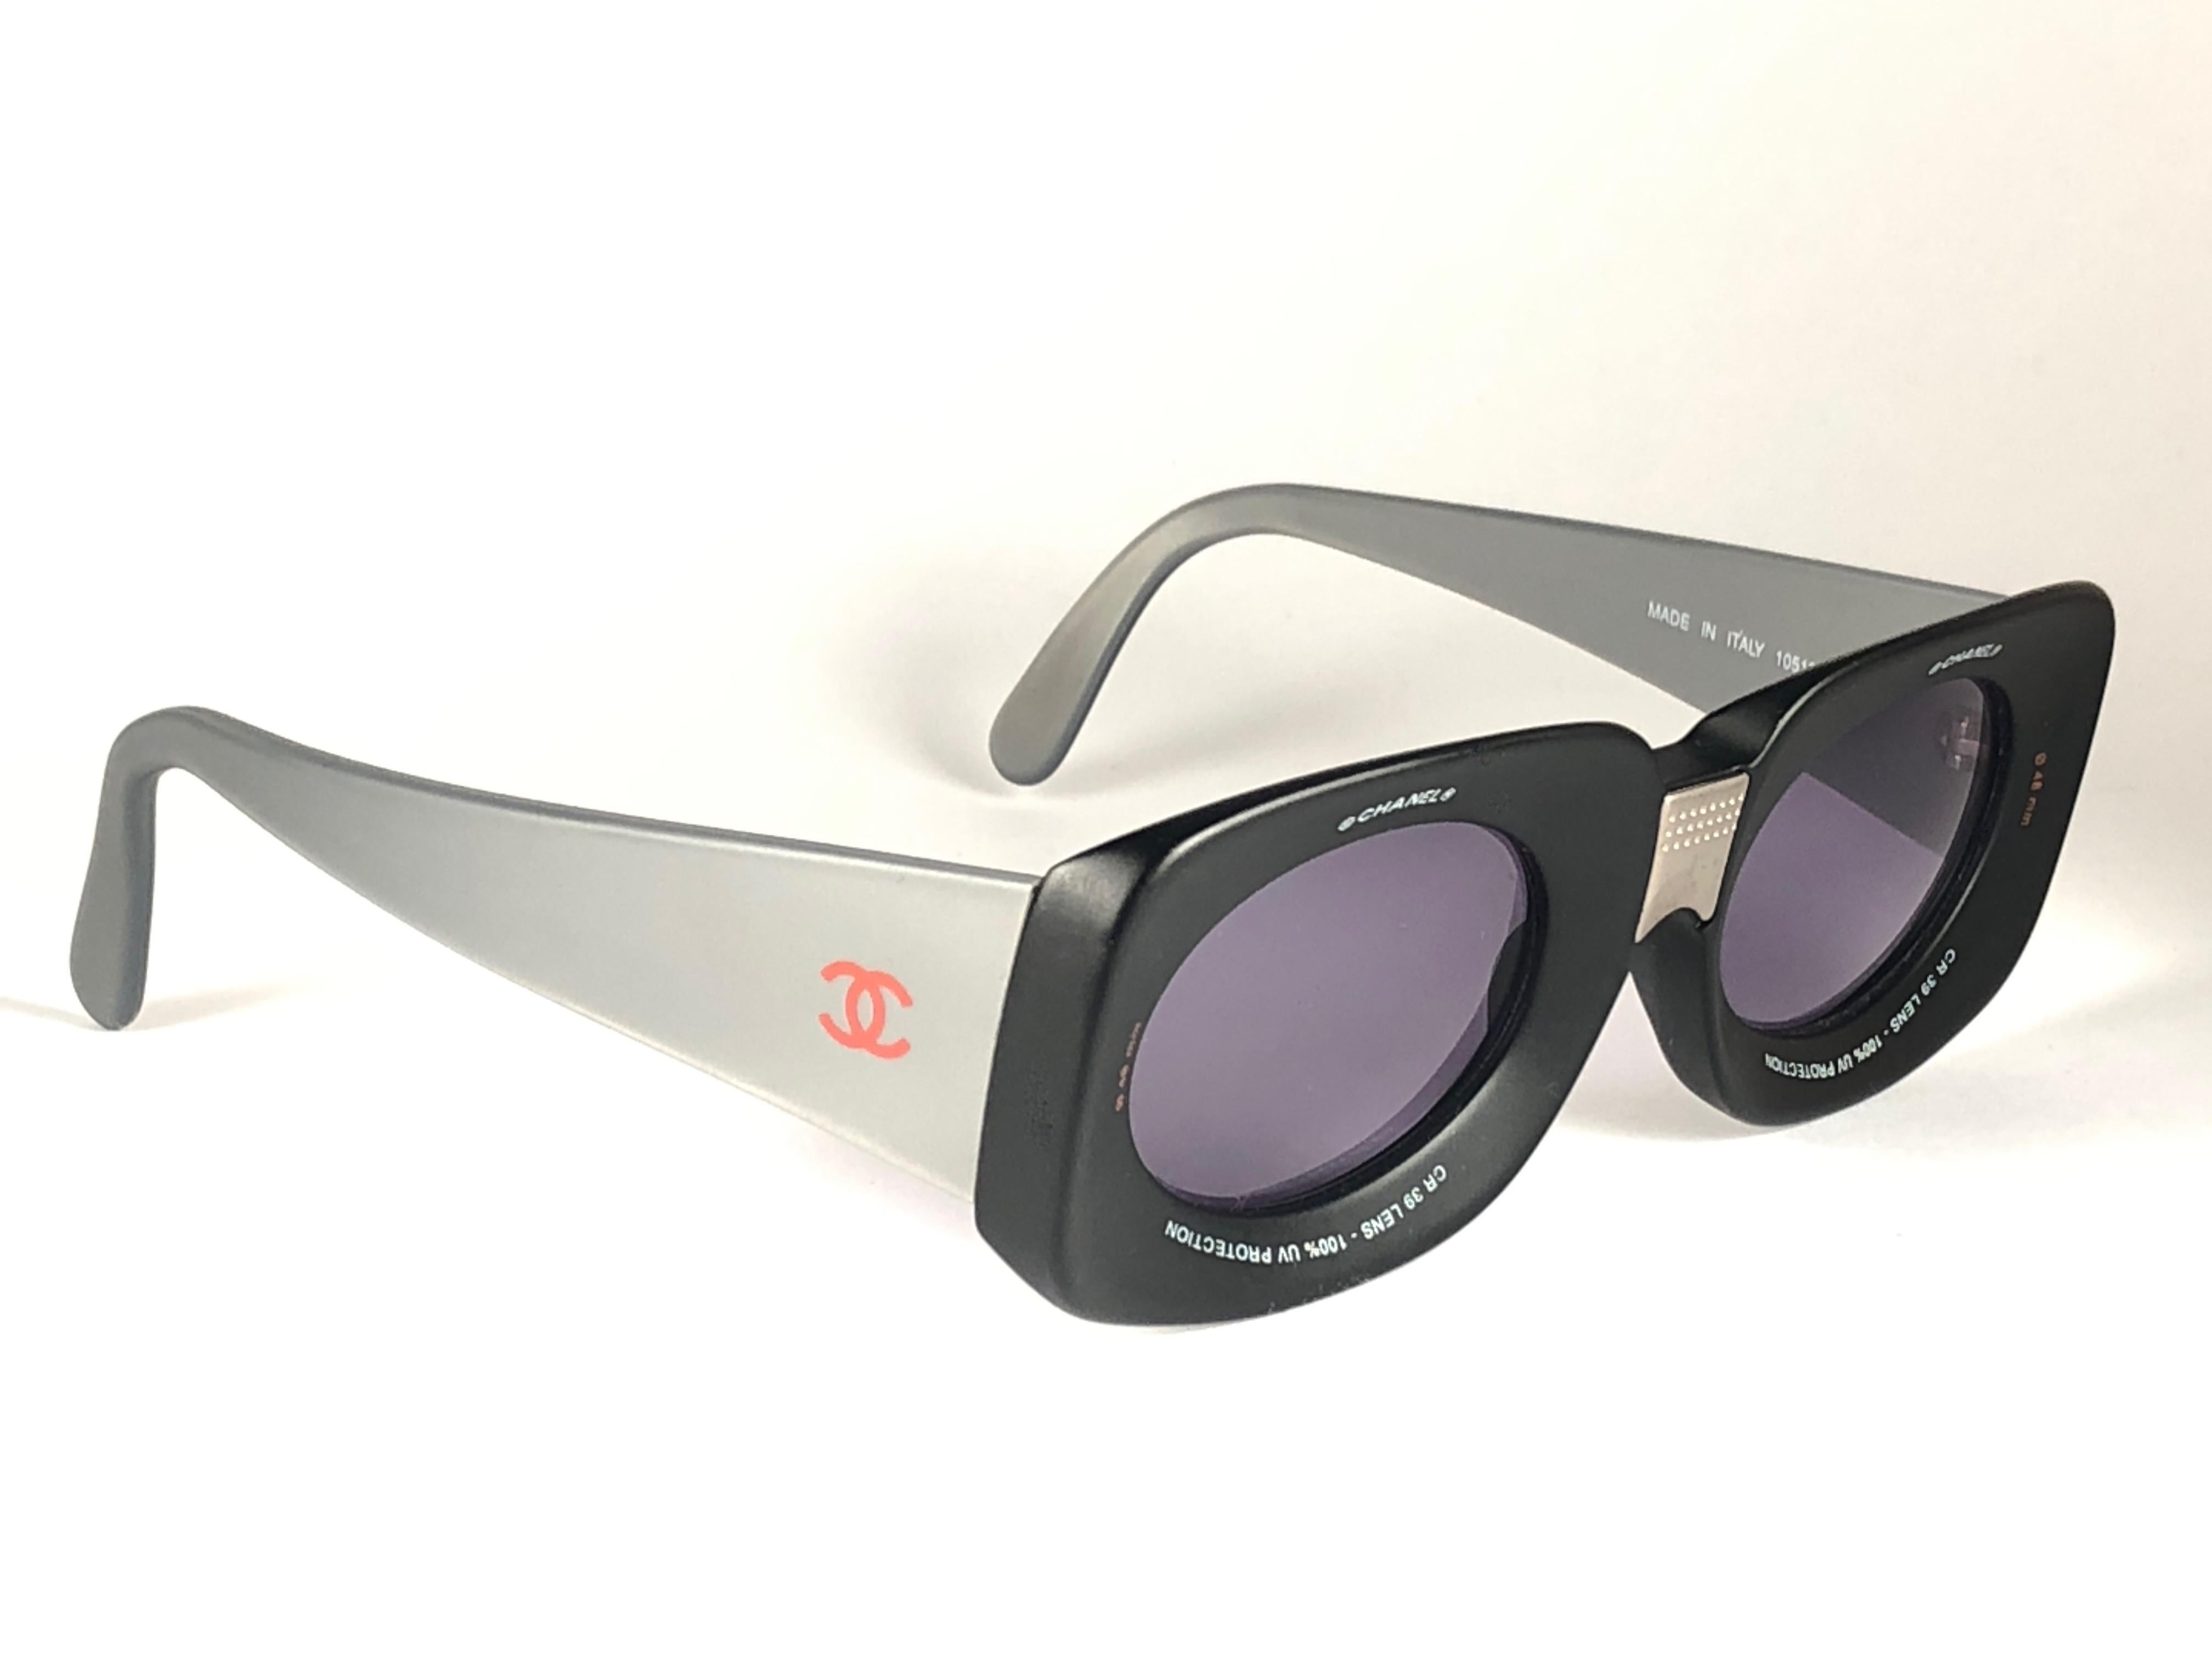 New Rare Chanel sunglasses.

A seldom and unique piece.

This pair of Chanel sunglasses is an absolute showstopper.

This pair may show minor sign of wear due to storage.

FRONT : 13 CMS
LENS HEIGHT : 3.6 CMS
LENS WIDTH : 4.6 CMS